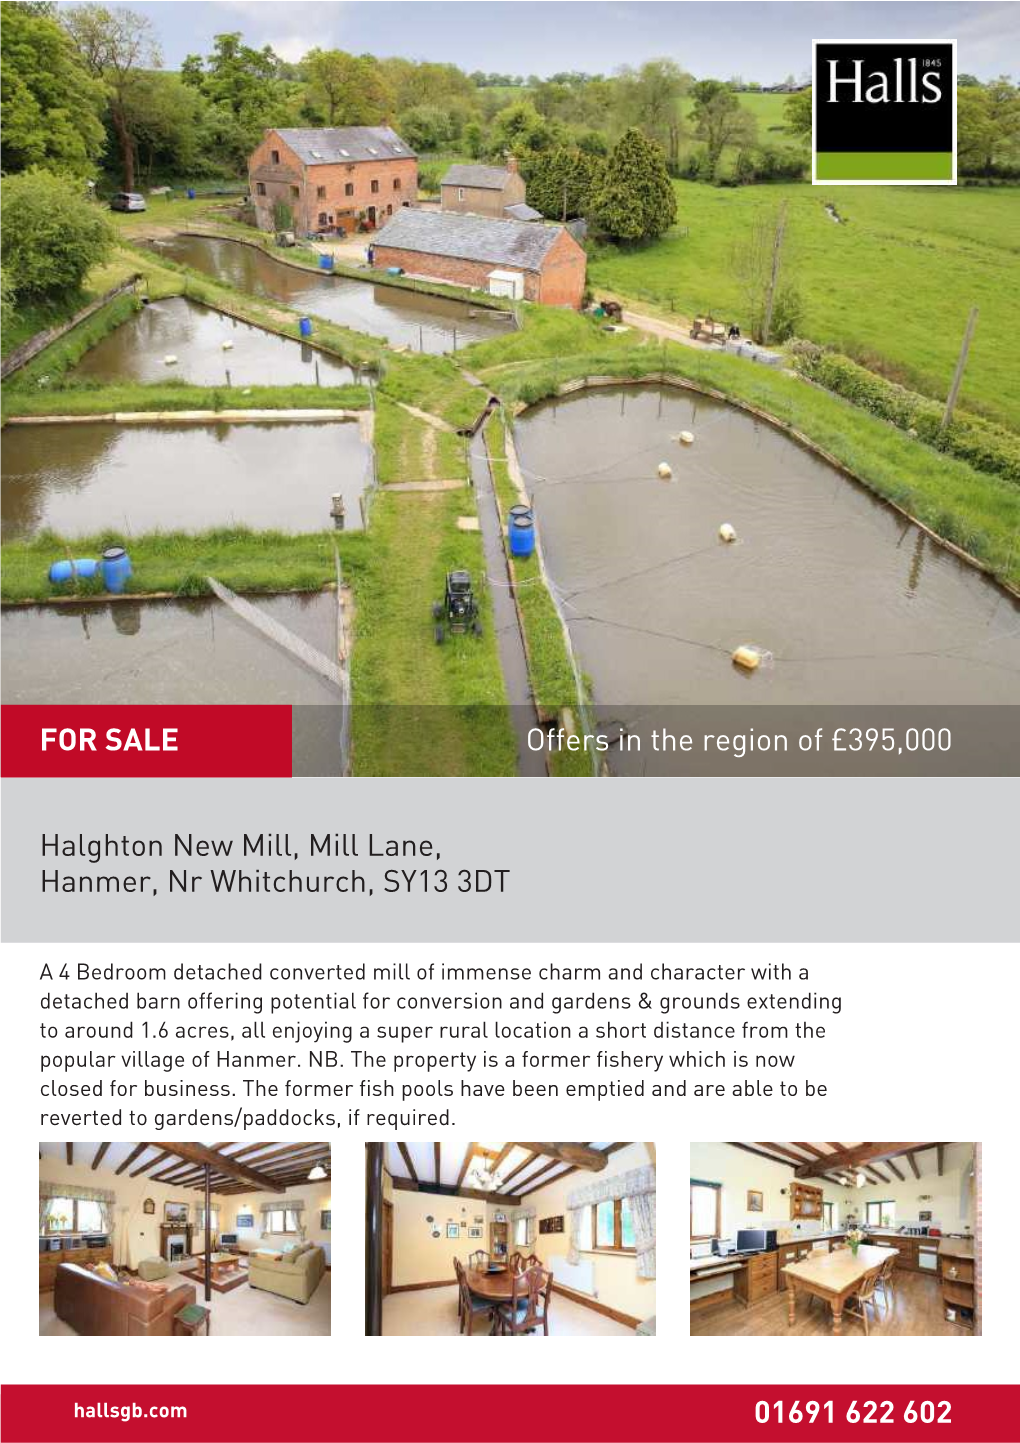 Halghton New Mill, Mill Lane, Hanmer, Nr Whitchurch, SY13 3DT